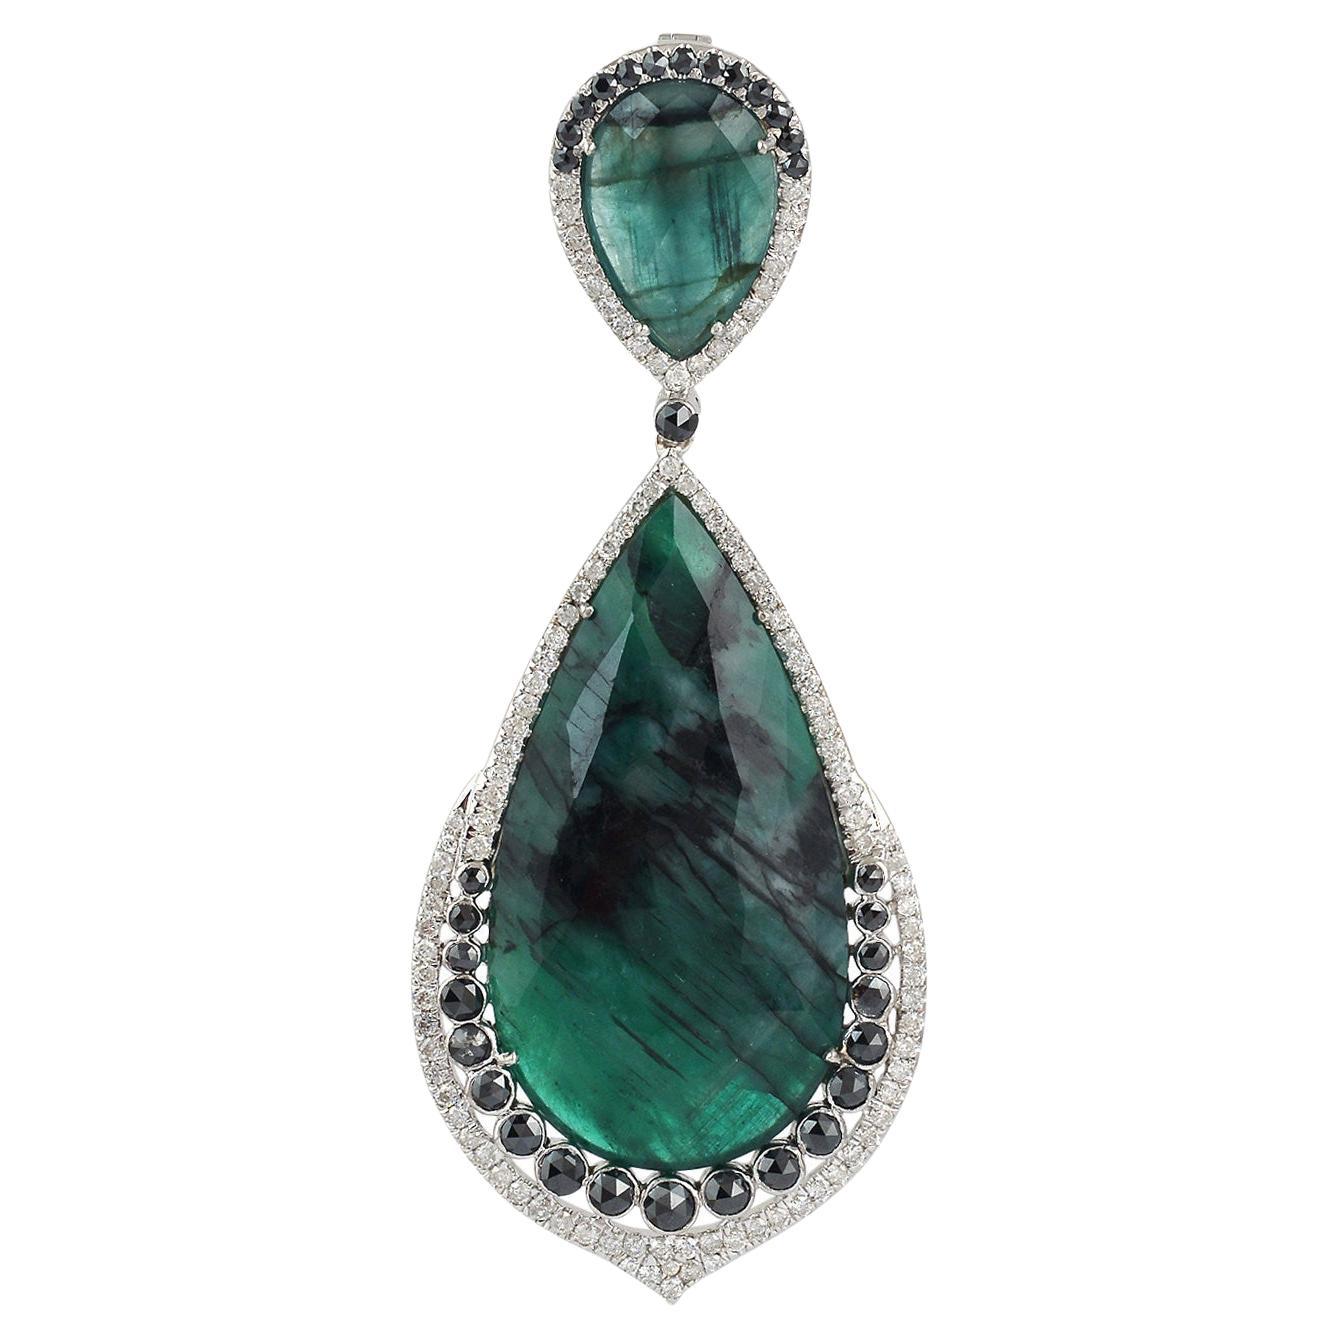 Pear Shaped Emerald Pendant With Pave Diamonds In 18k White Gold